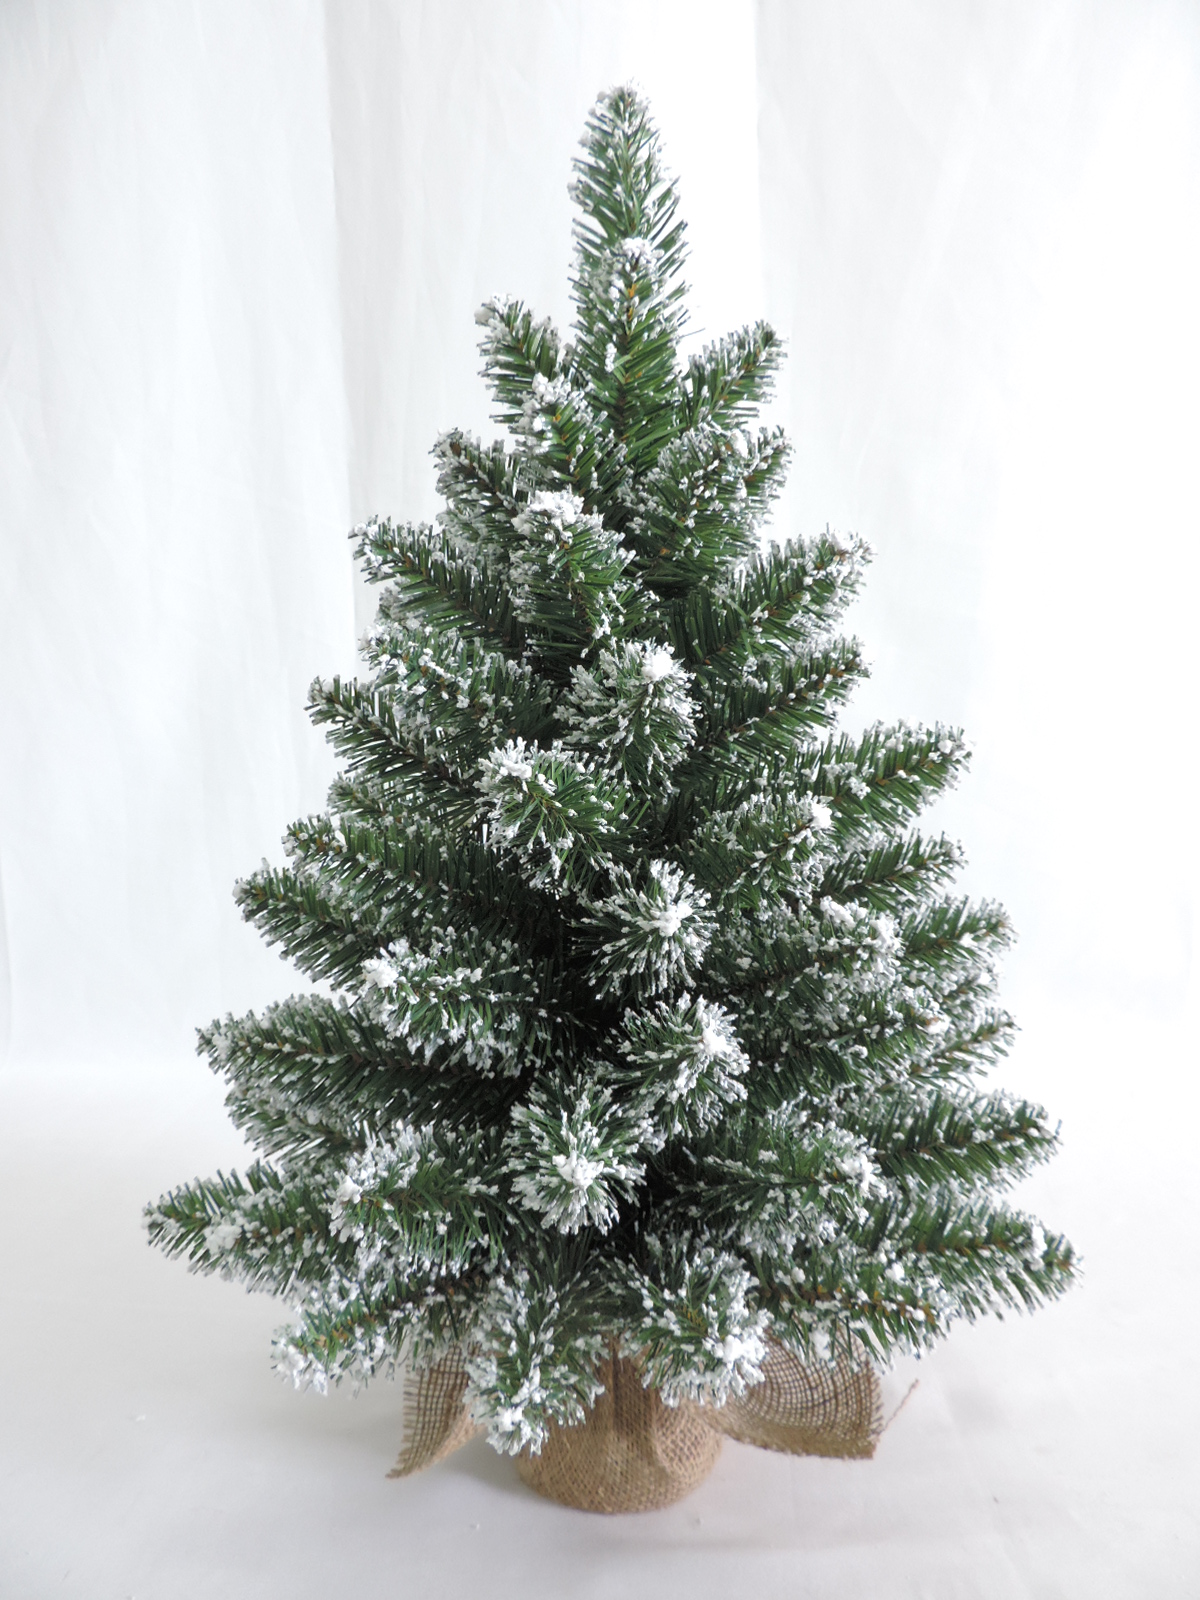 Factory Direct: Artificial Christmas Burlap Tree - Perfect for Home, Wedding Décor, Tabletop - 16-BT3-2FT